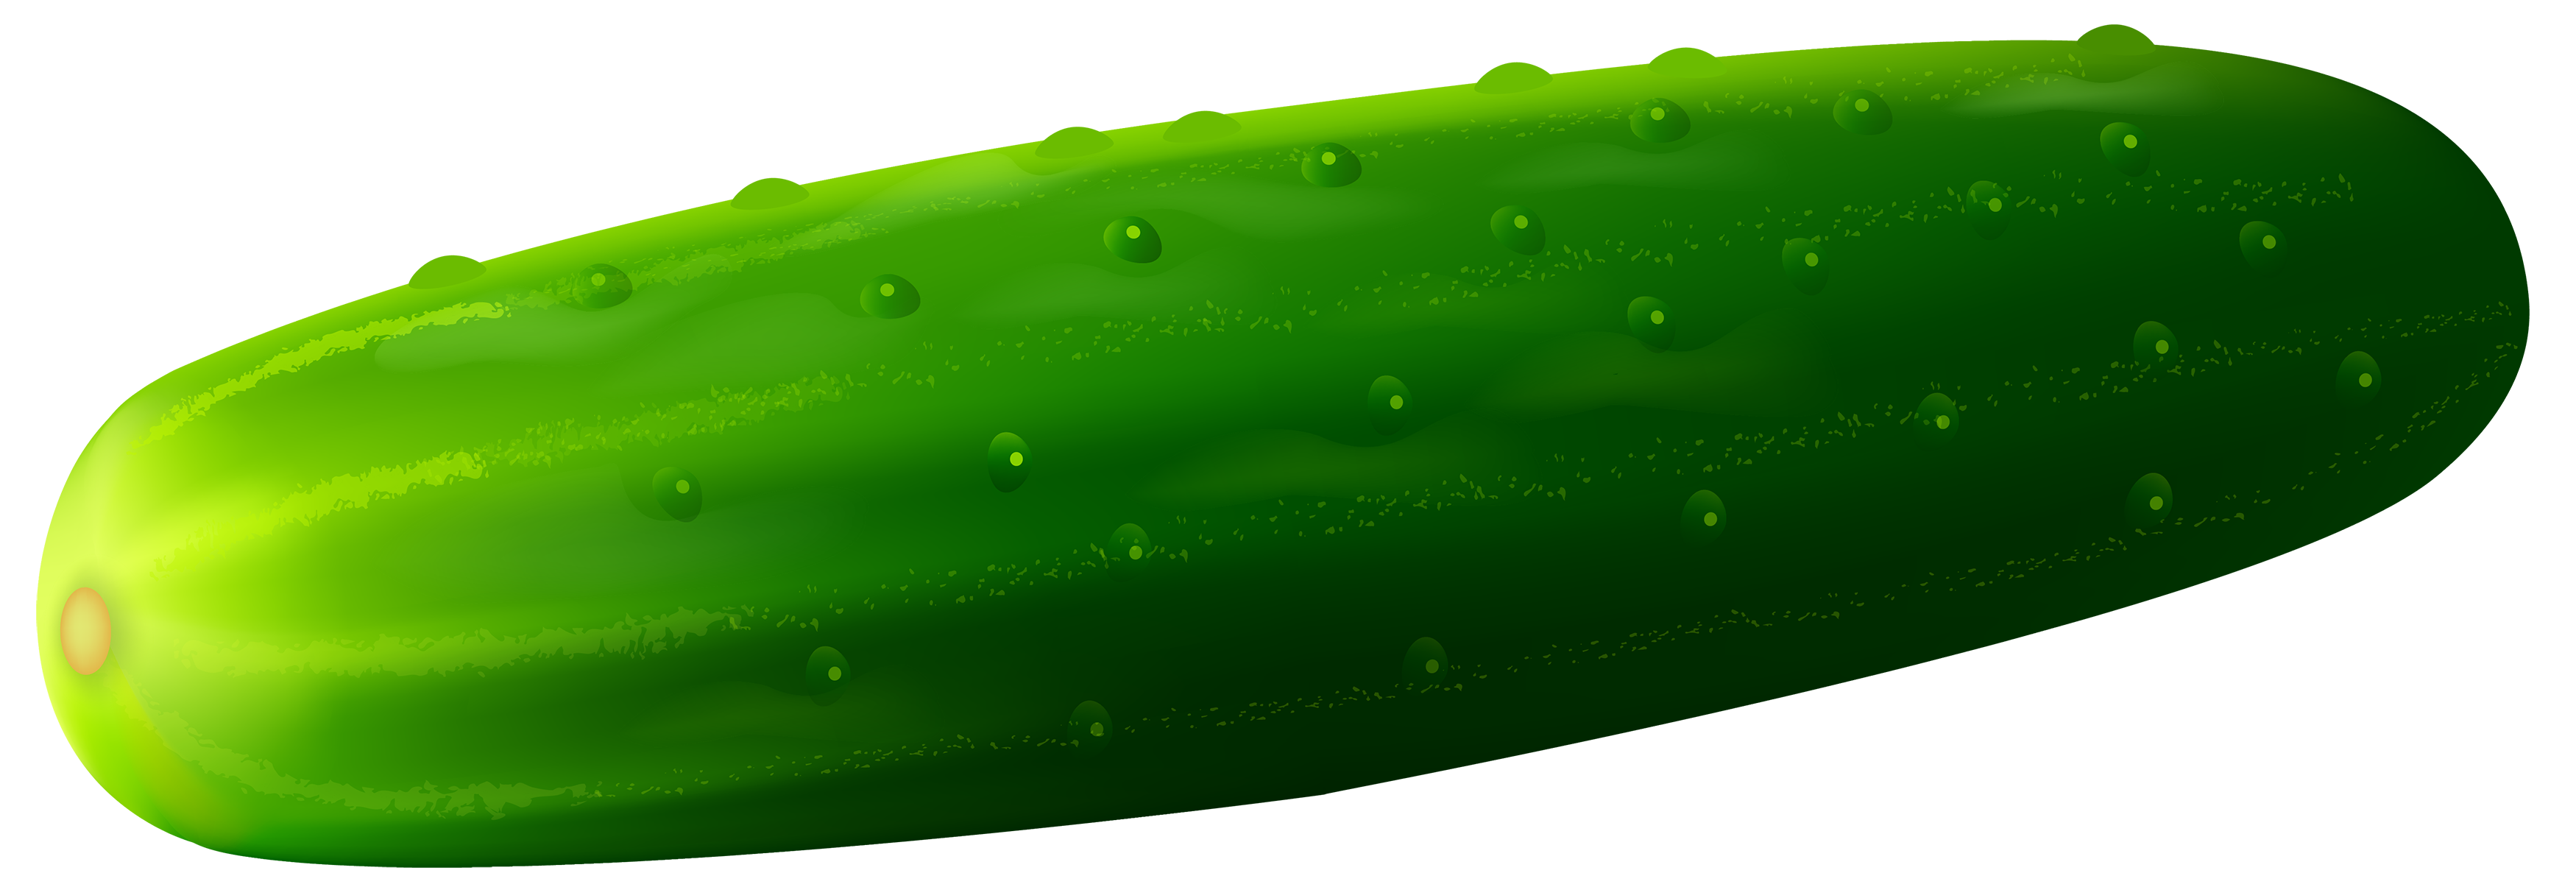 Cucumber images free download clipart